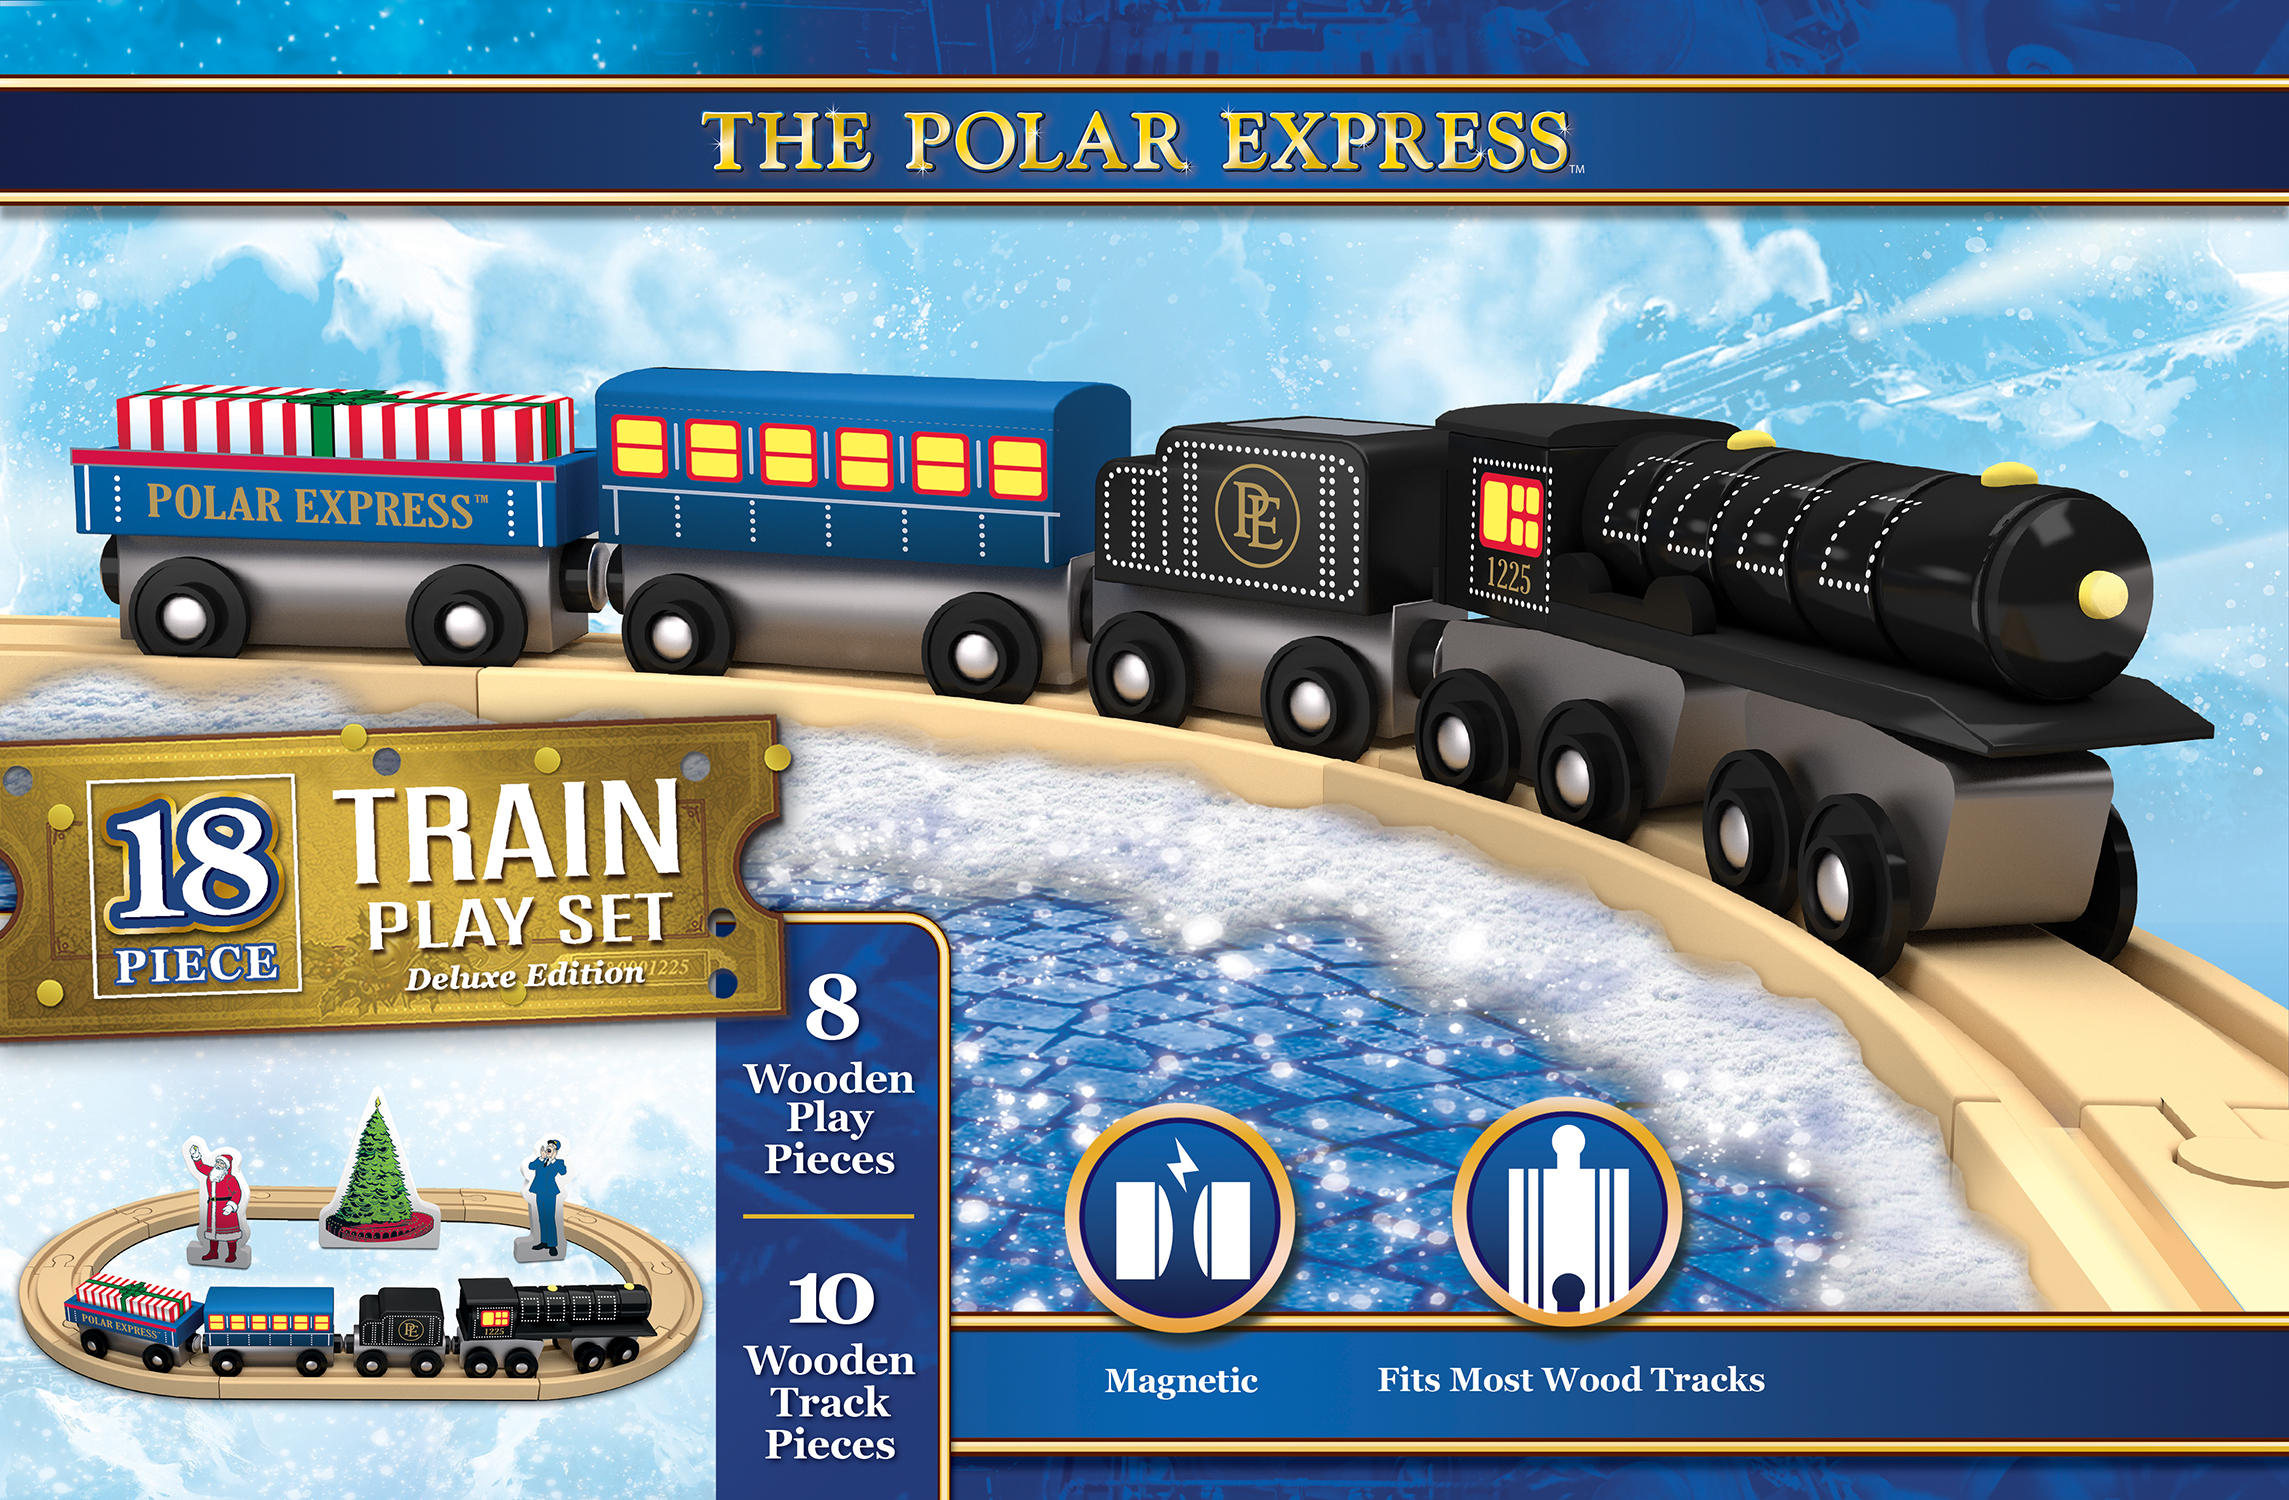 MasterPieces Wood Train Sets - The Polar Express 18 Piece Train Set - image 1 of 4